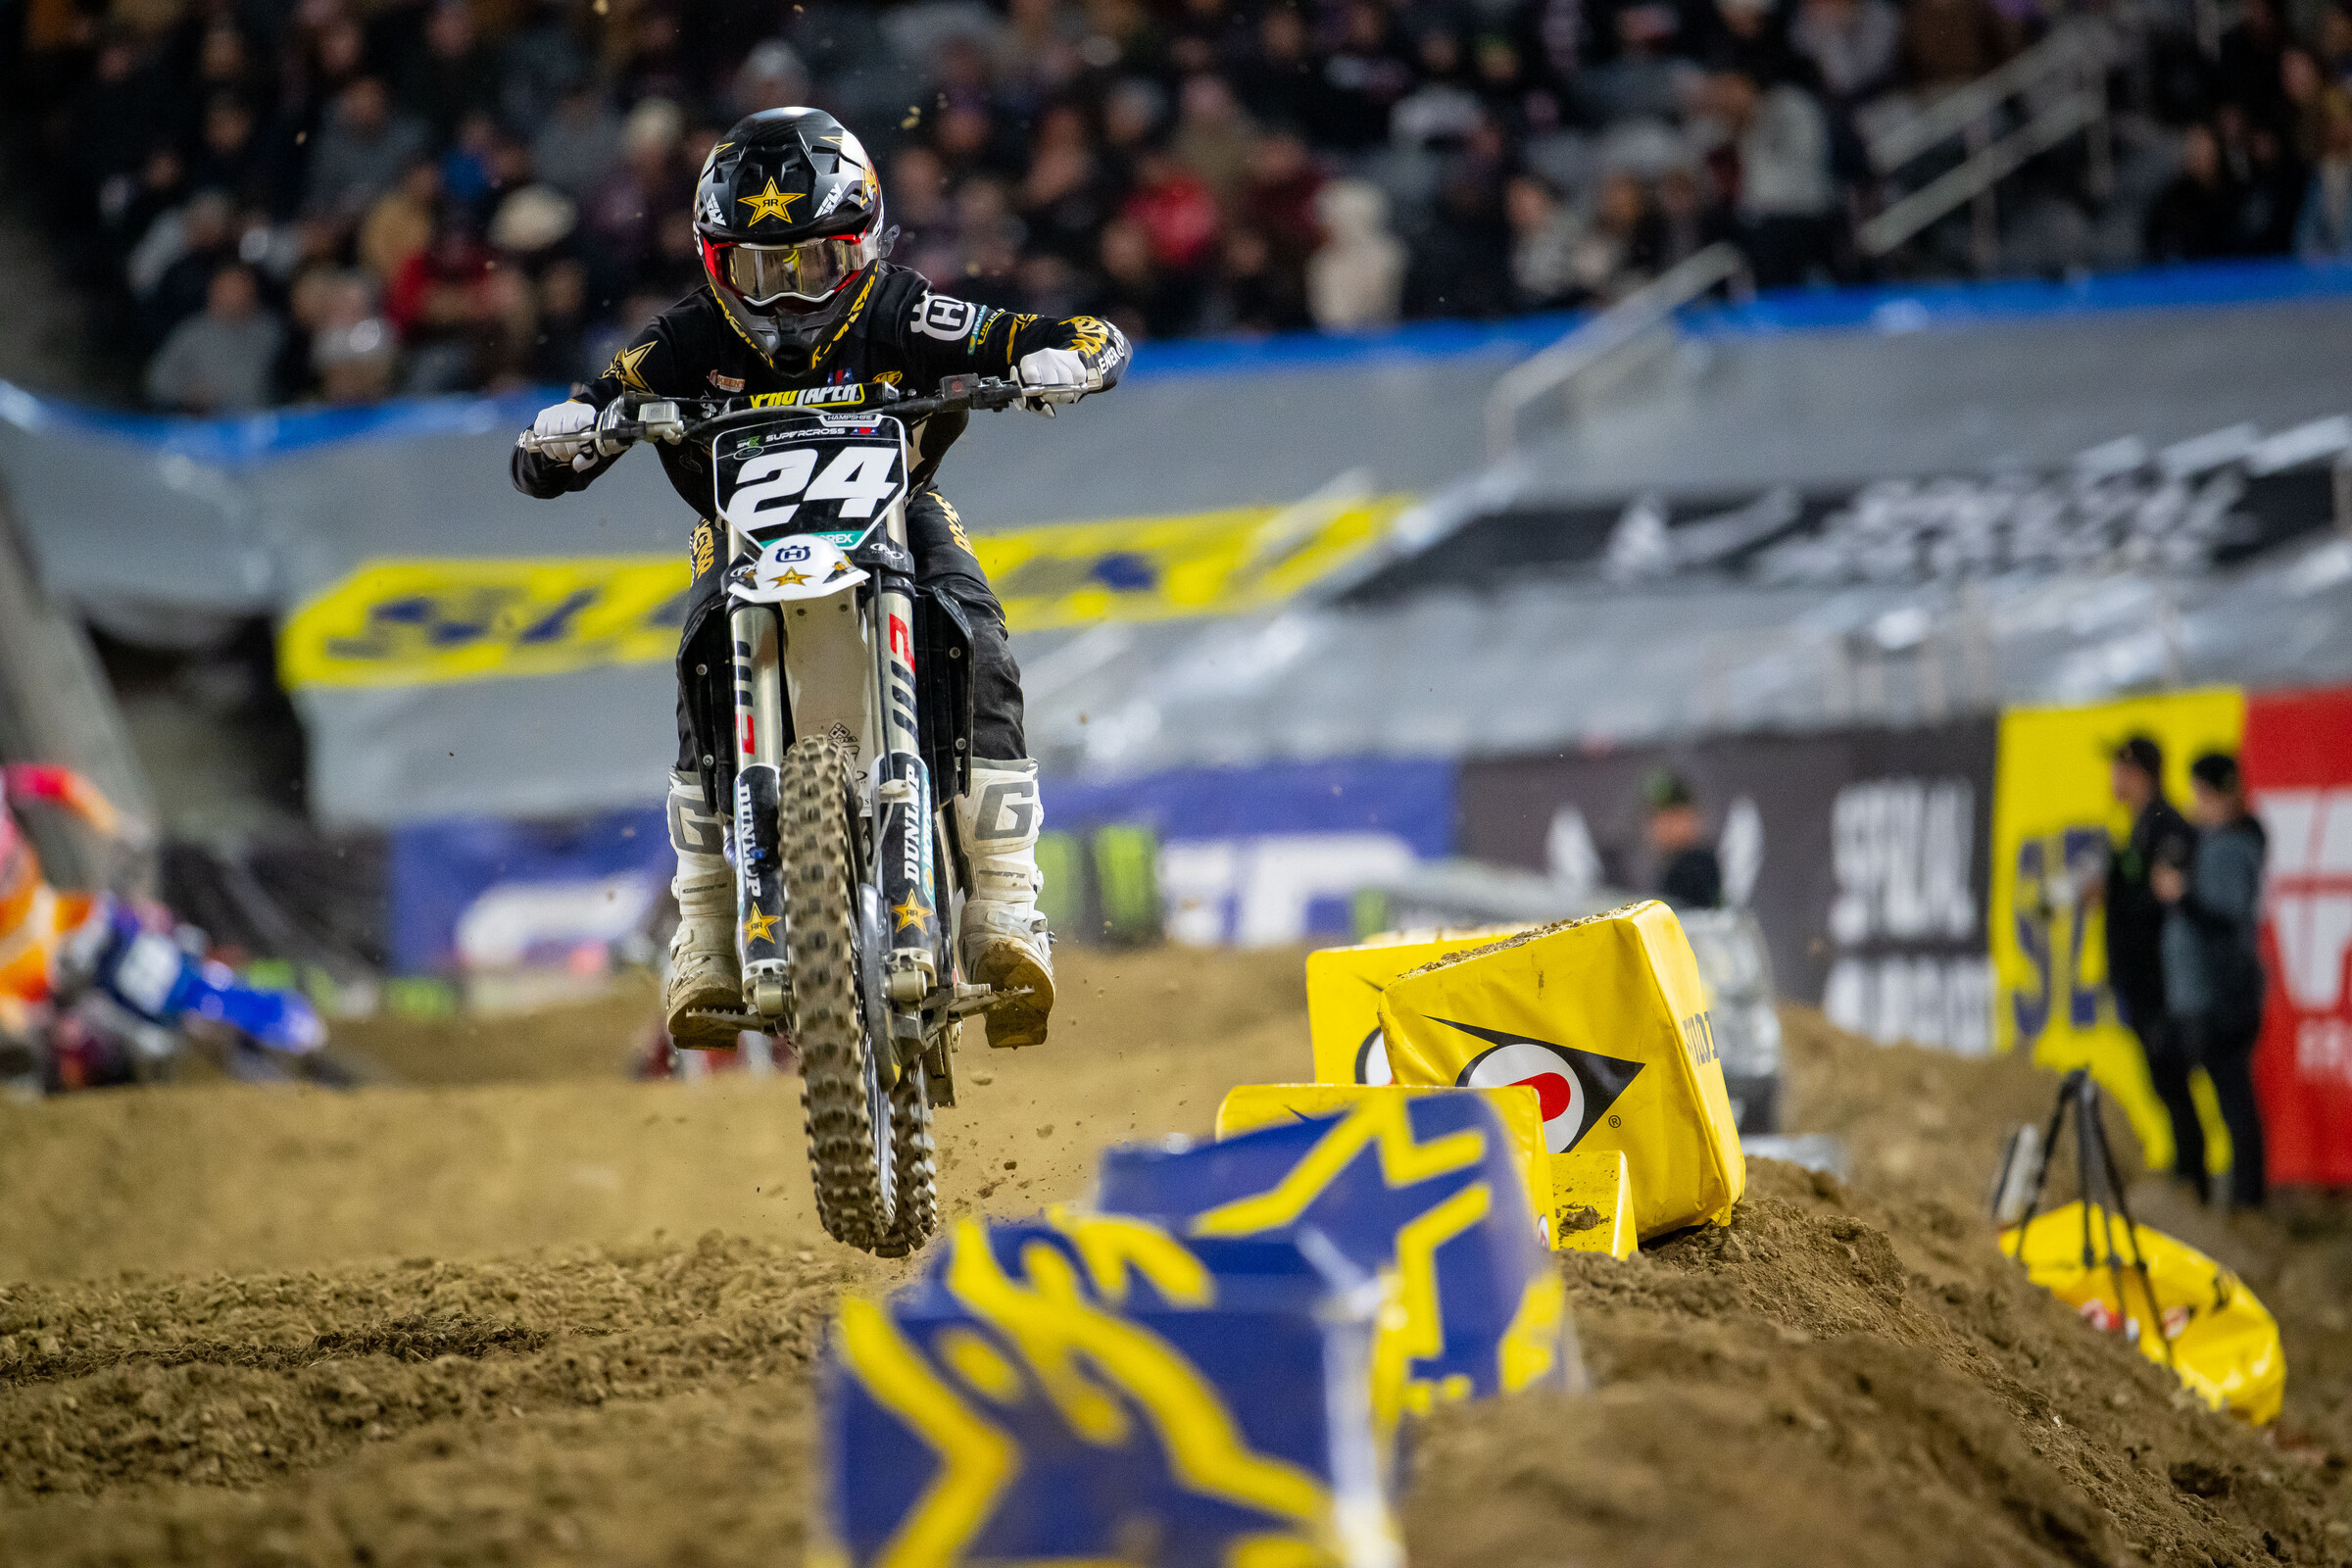 10 Storylines to Watch at 2023 Oakland Supercross